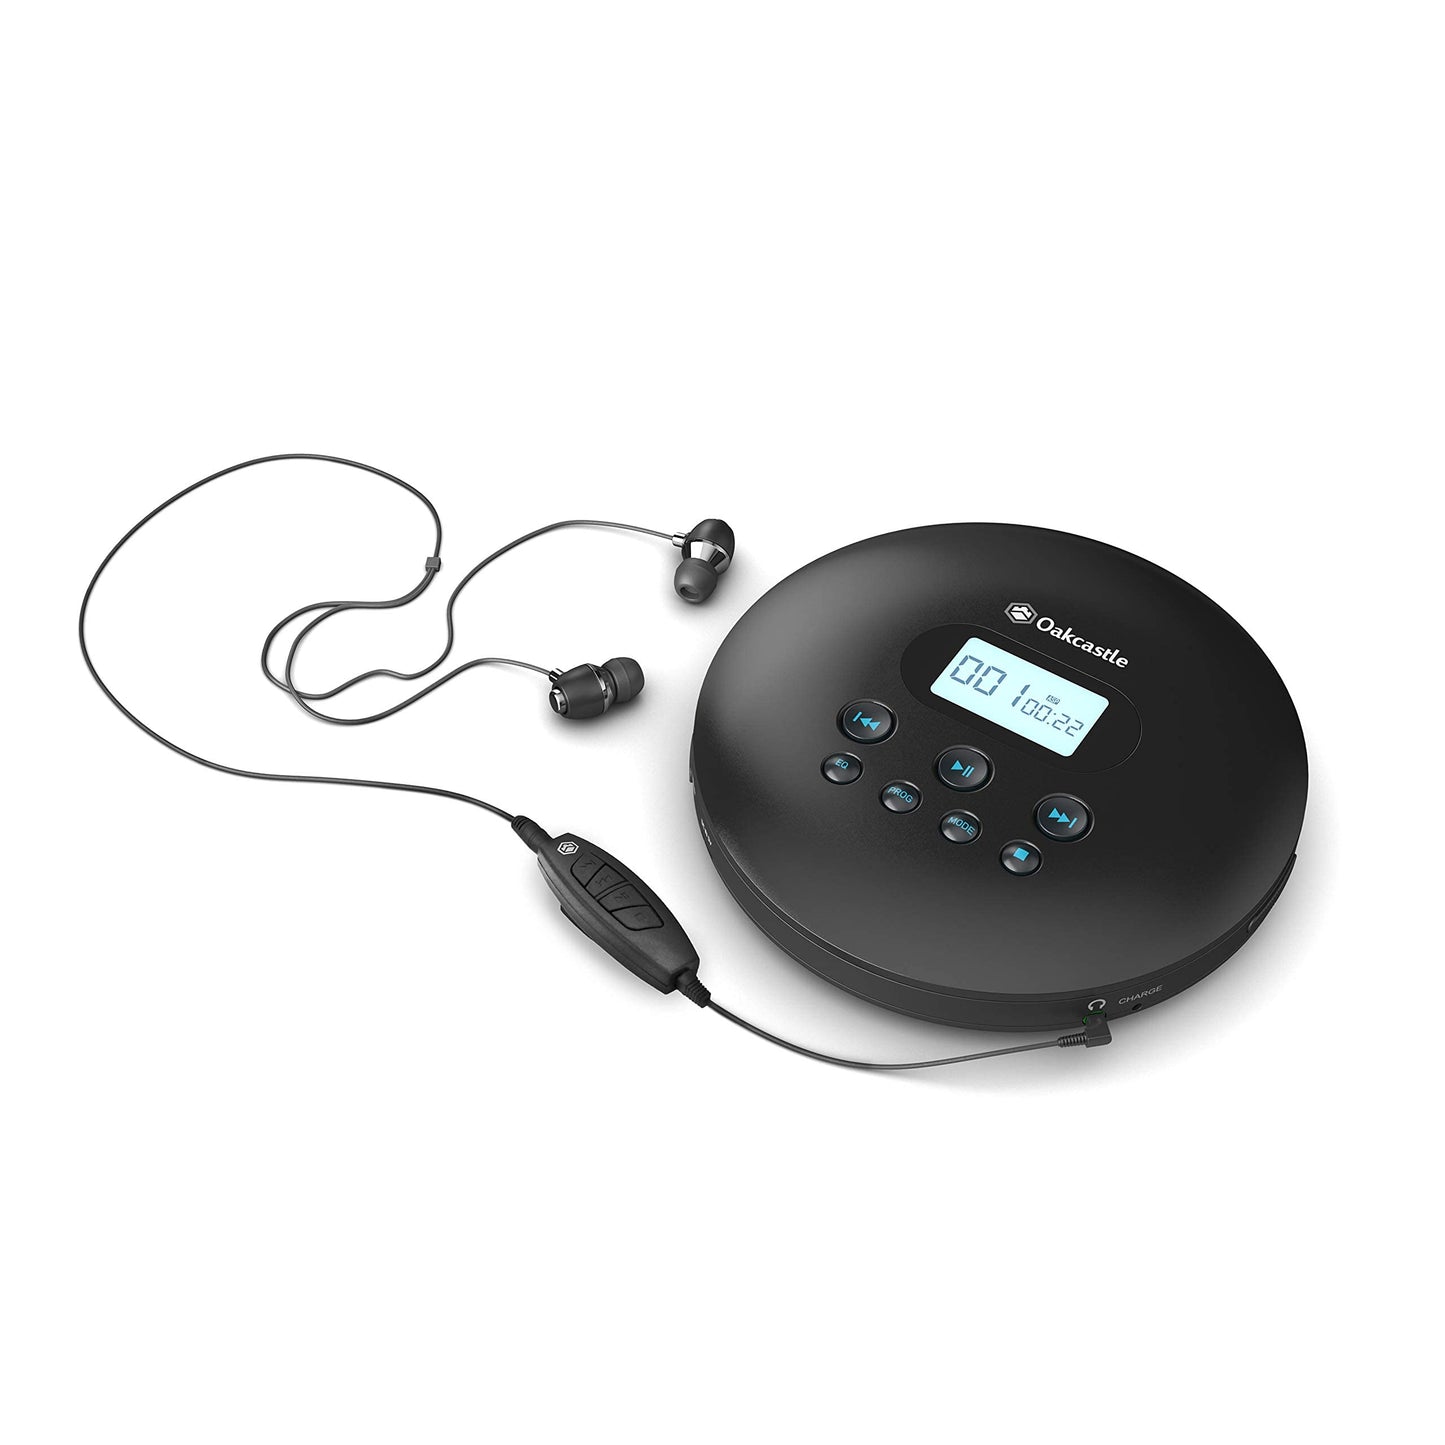 Oakcastle Portable CD Player Rechargeable Battery Bluetooth Black CD100